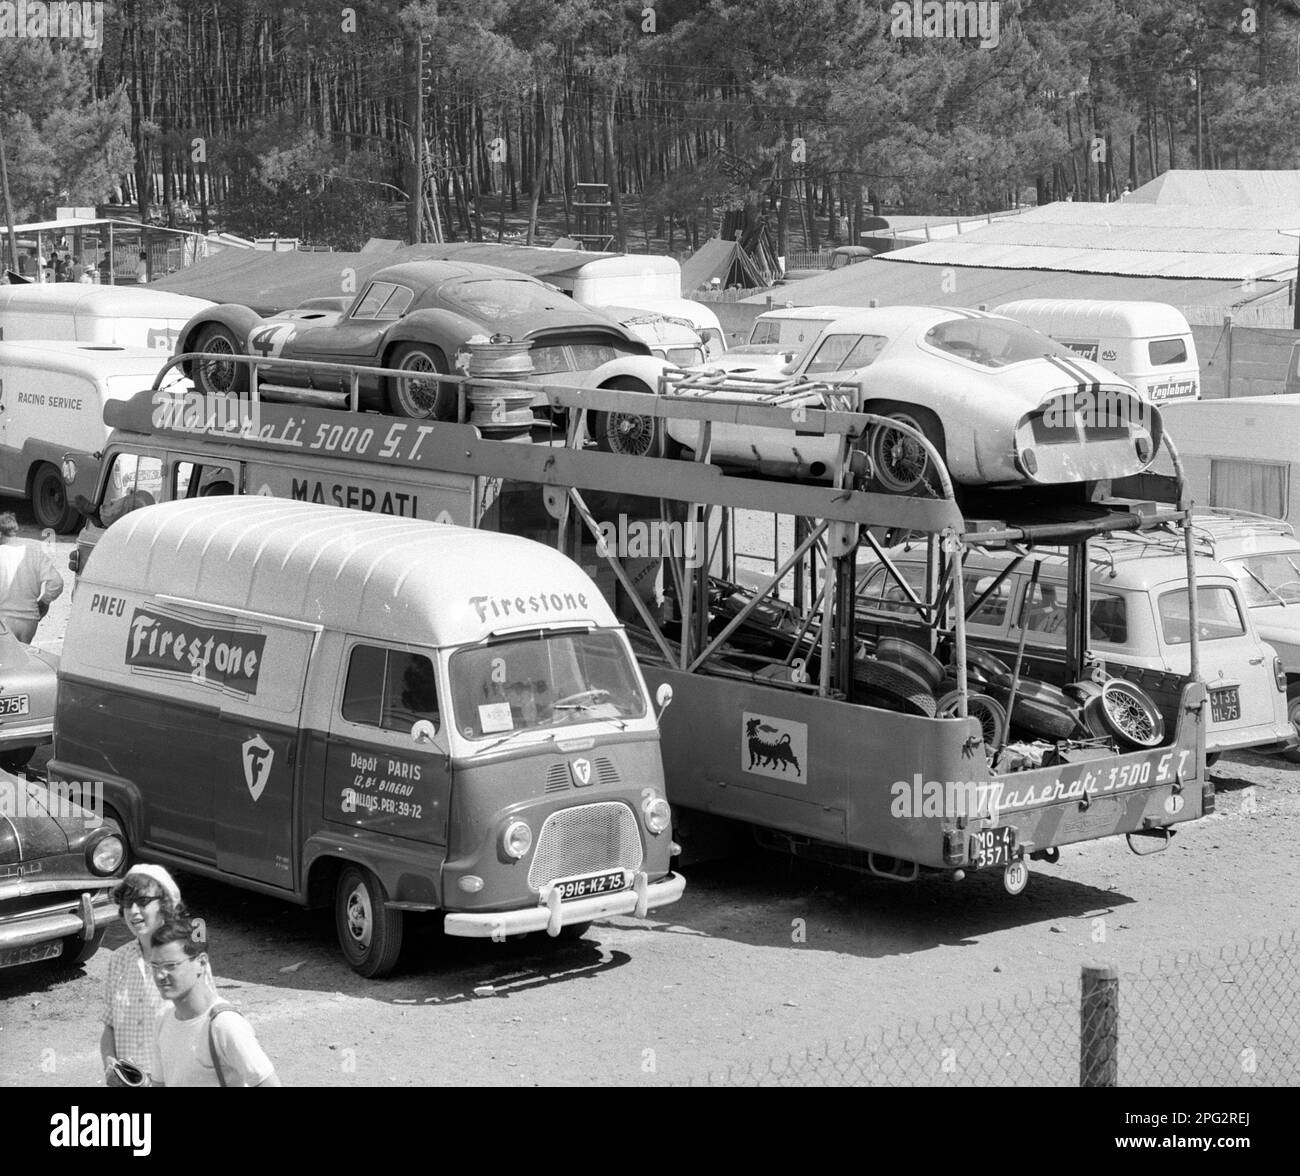 Maserati team transporter in paddock at 1962 Le Mans race Stock Photo